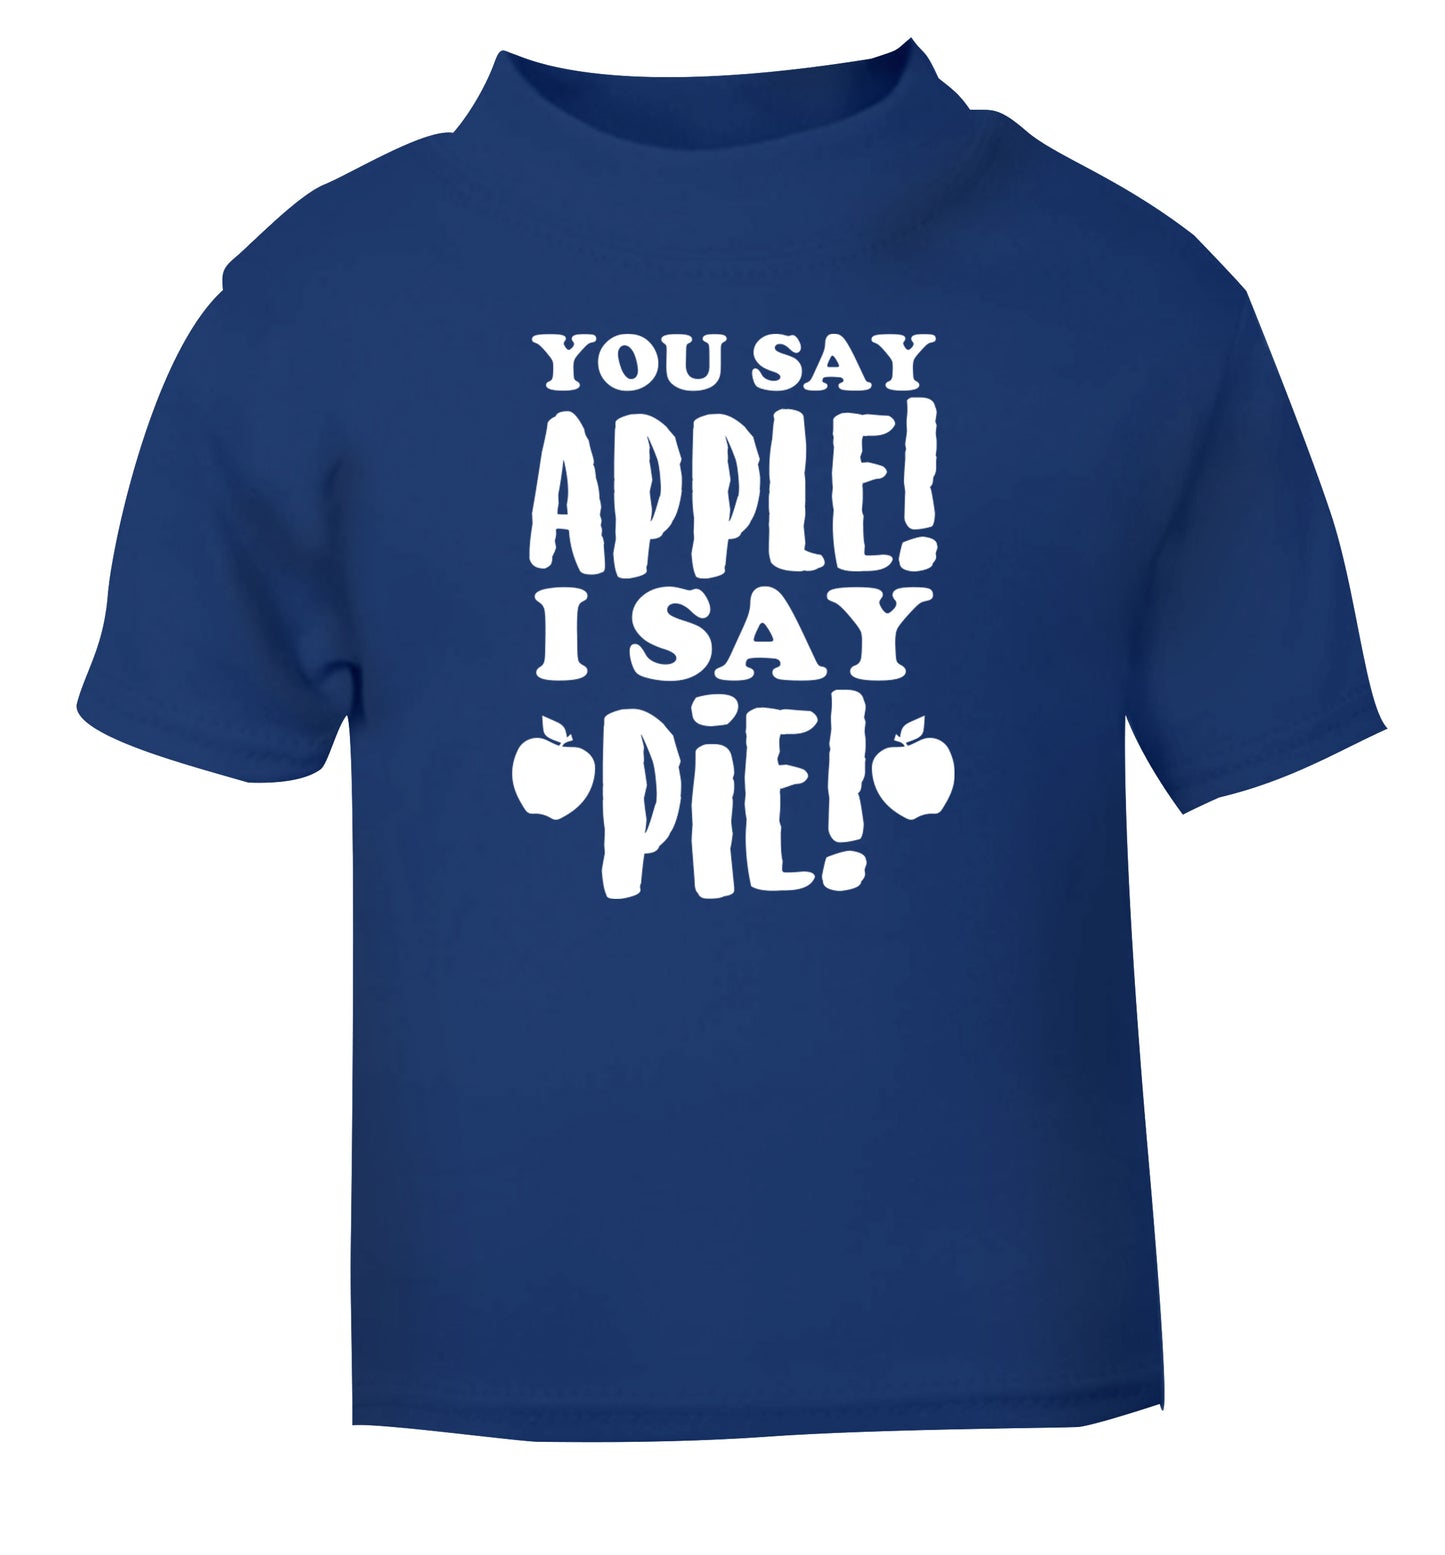 You say apple I say pie! blue Baby Toddler Tshirt 2 Years